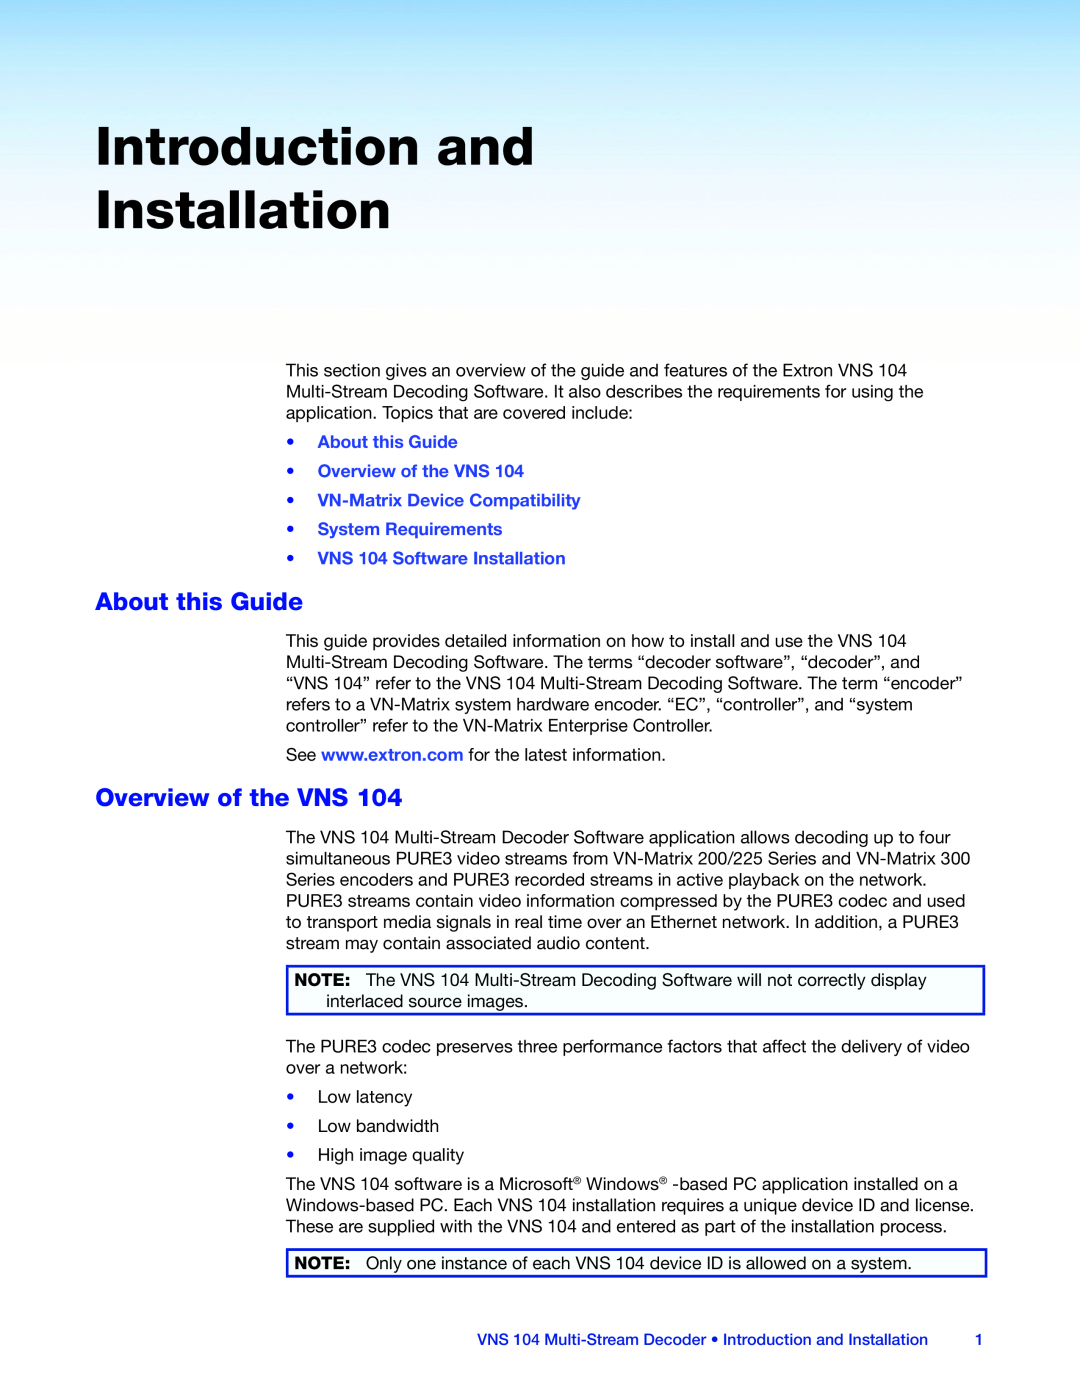 Extron electronic VNS 104 manual Introduction and Installation, About this Guide, Overview of the VNS, System Requirements 